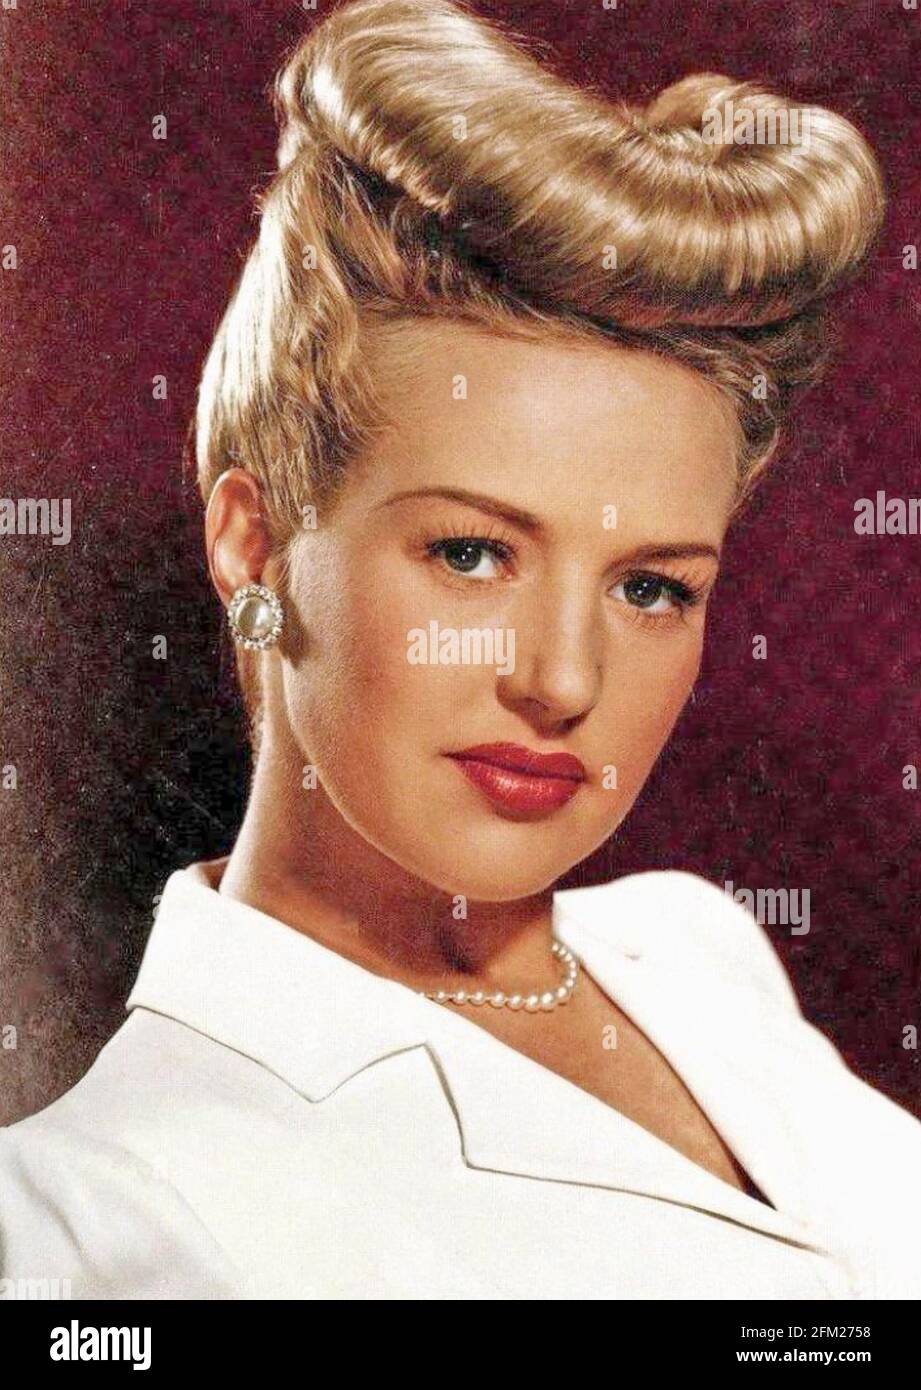 BETTY GRABLE 1916 1973 American Film Actress And Singer About 1943